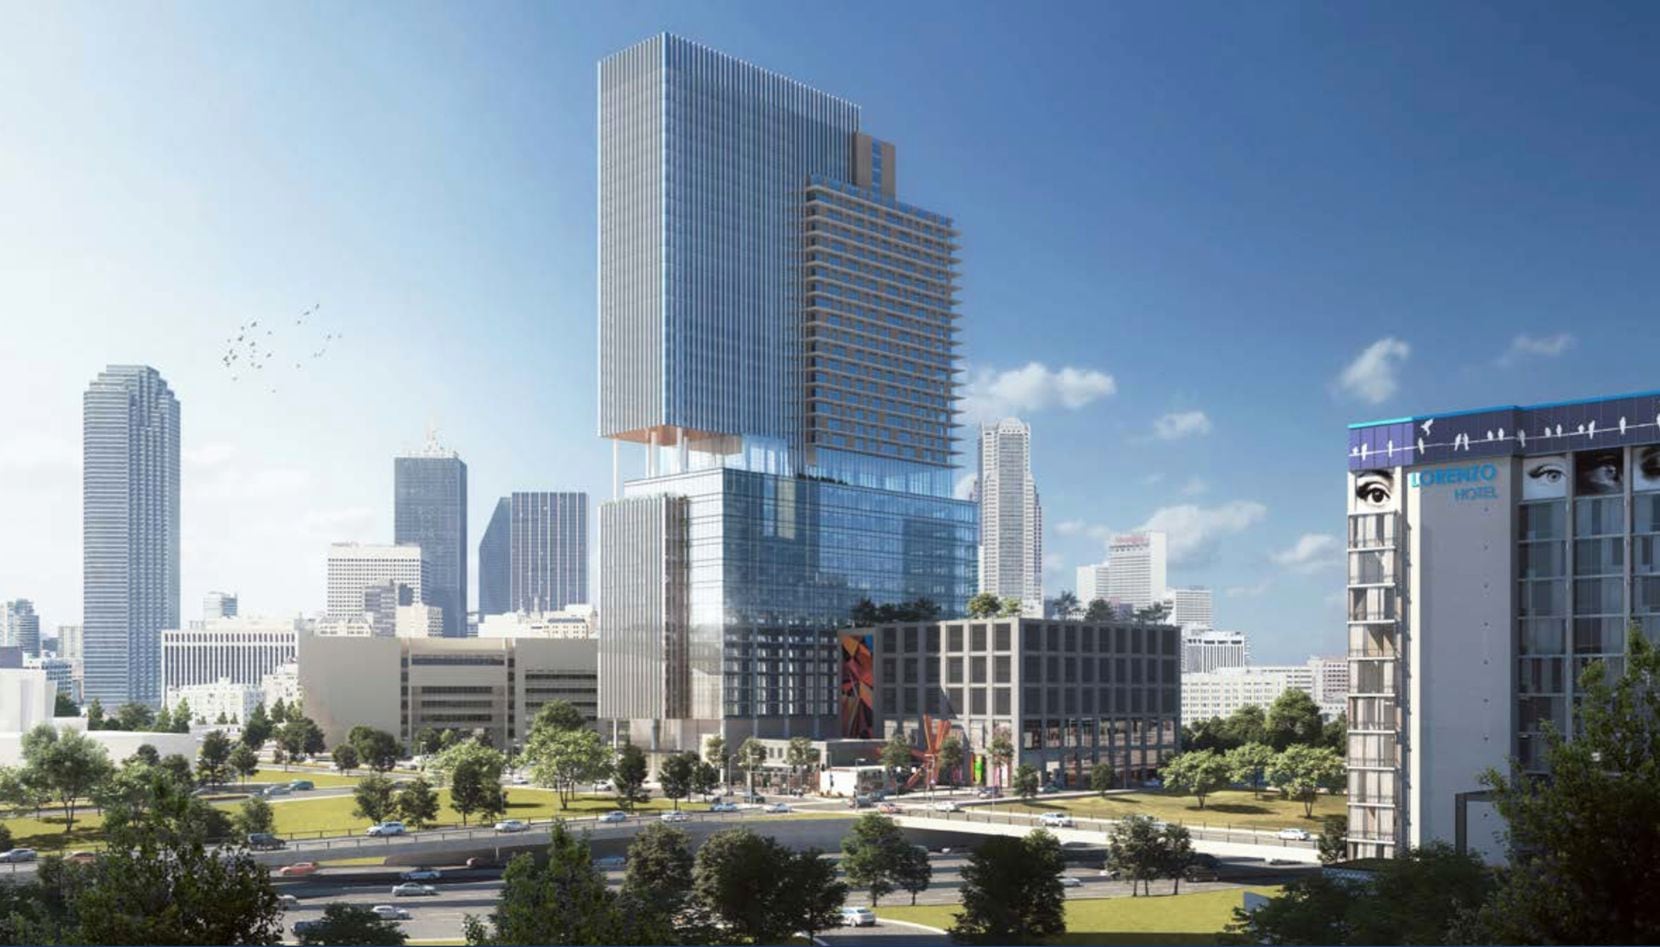 The proposed Newpark tower would be on Canton Street near Dallas' City Hall.